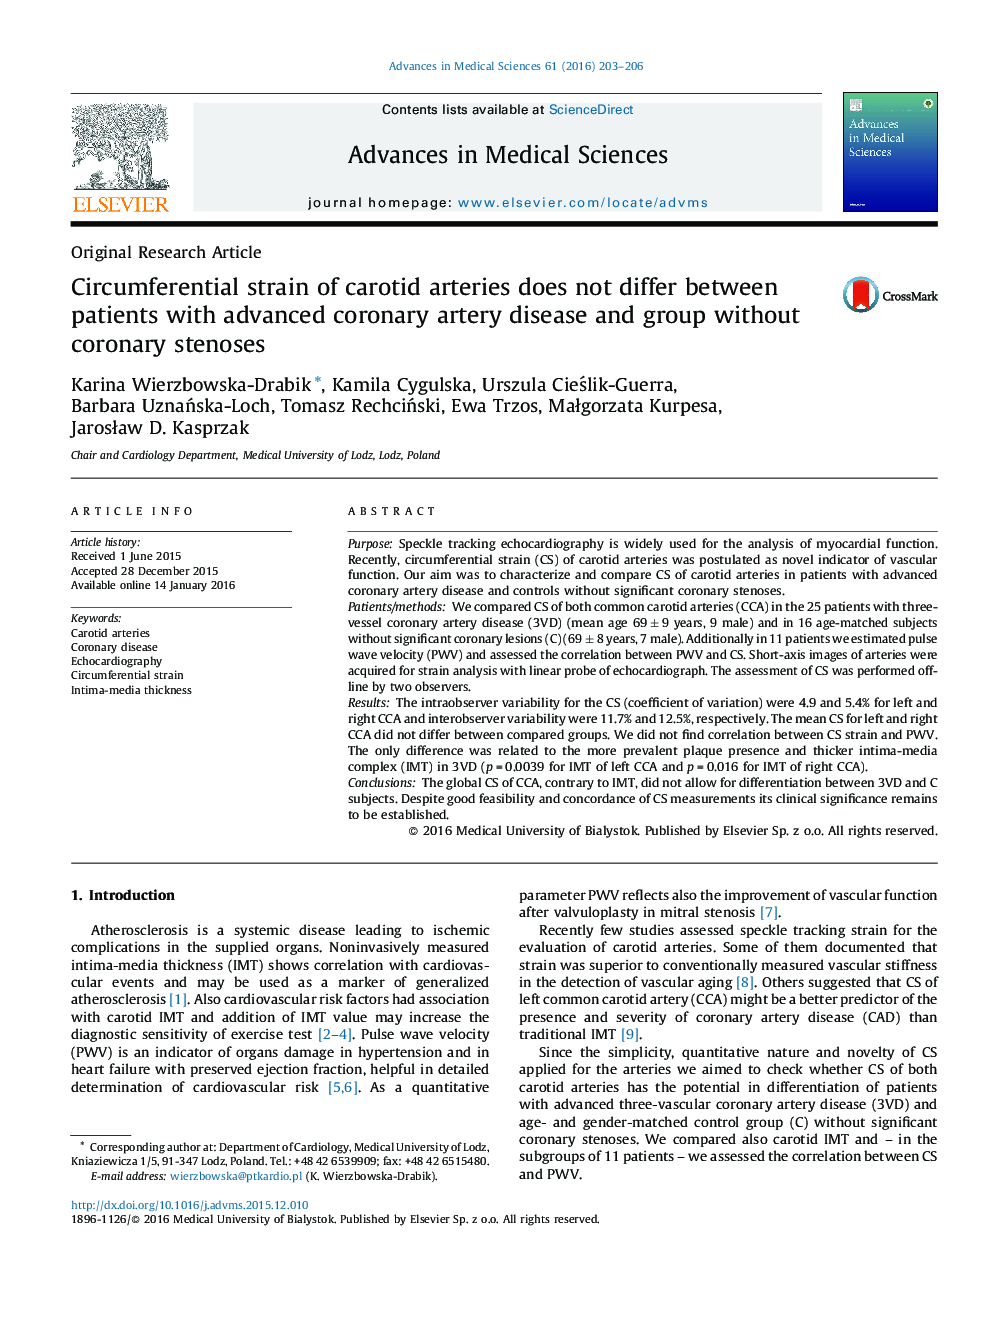 Circumferential strain of carotid arteries does not differ between patients with advanced coronary artery disease and group without coronary stenoses